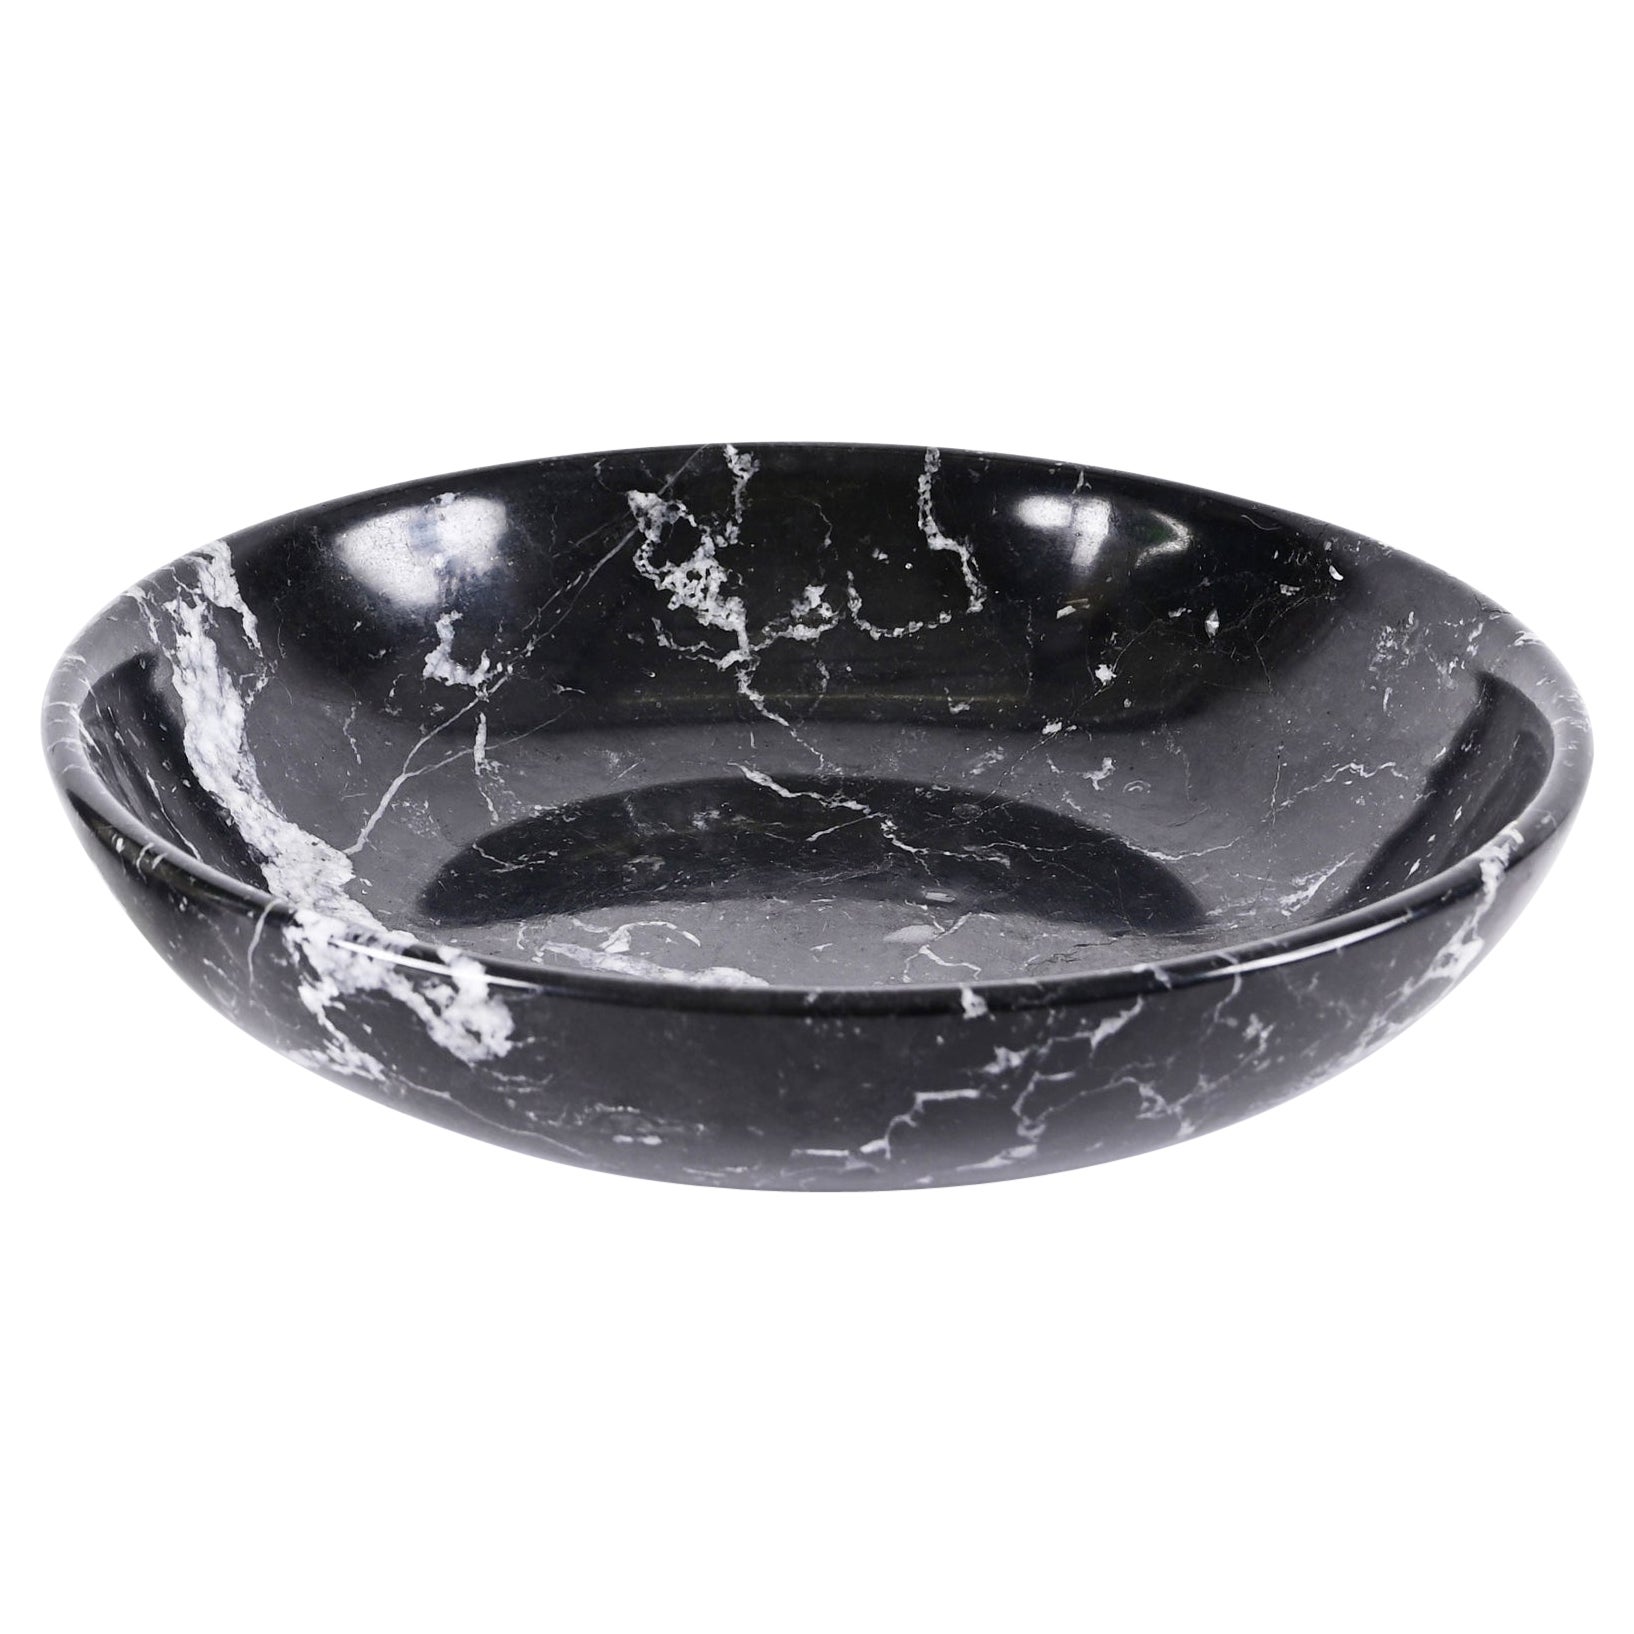 Midcentury Black Marble with White Grains Round Italian Decorative Bowl, 1950s For Sale